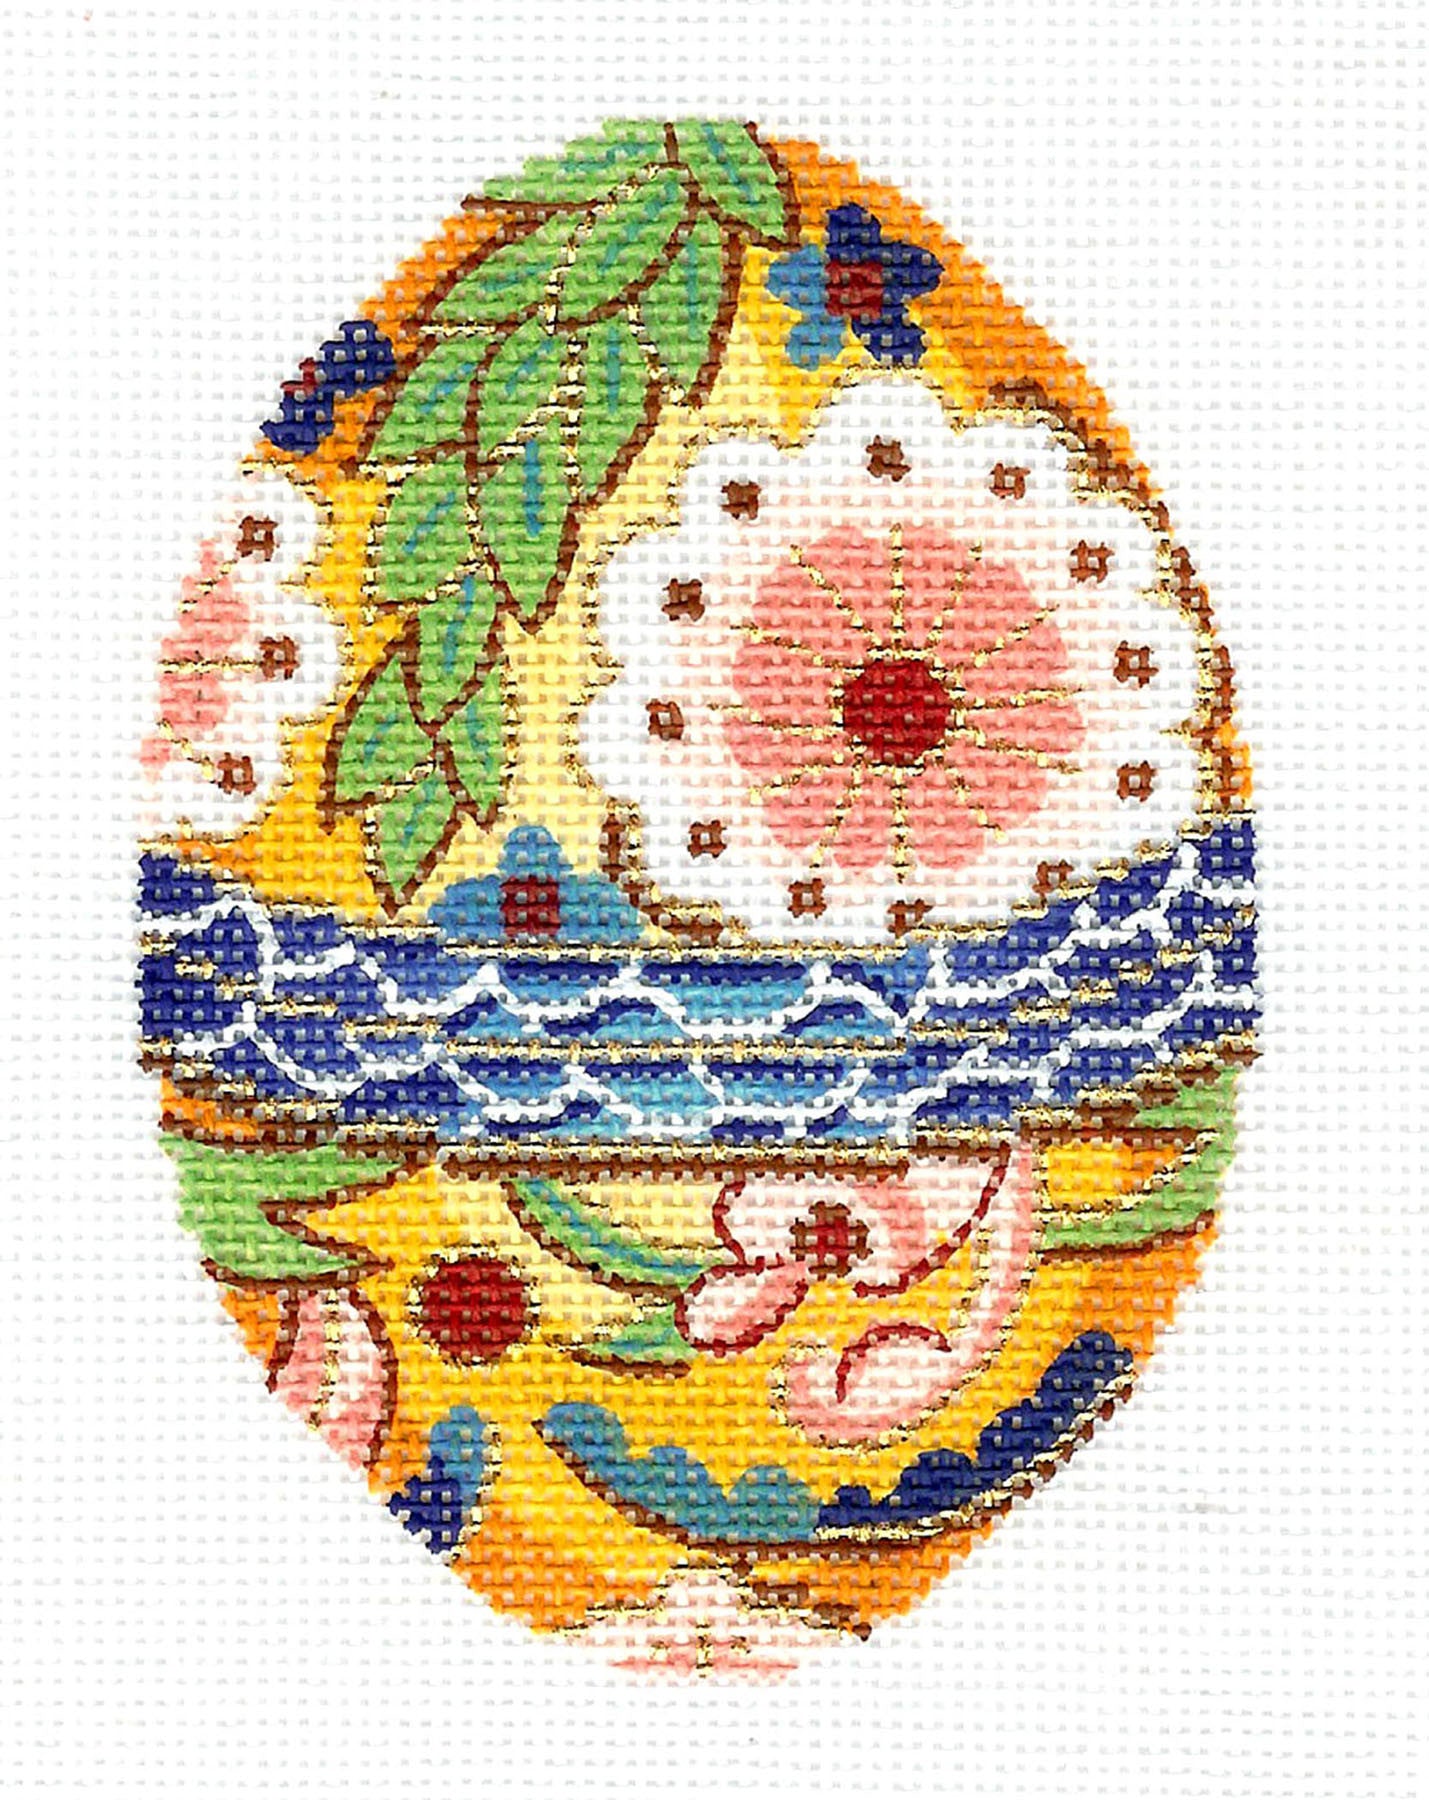 Faberge Egg ~ Elegant Jeweled Egg Floral handpainted 18 mesh Needlepoint Canvas or Ornament by LEE